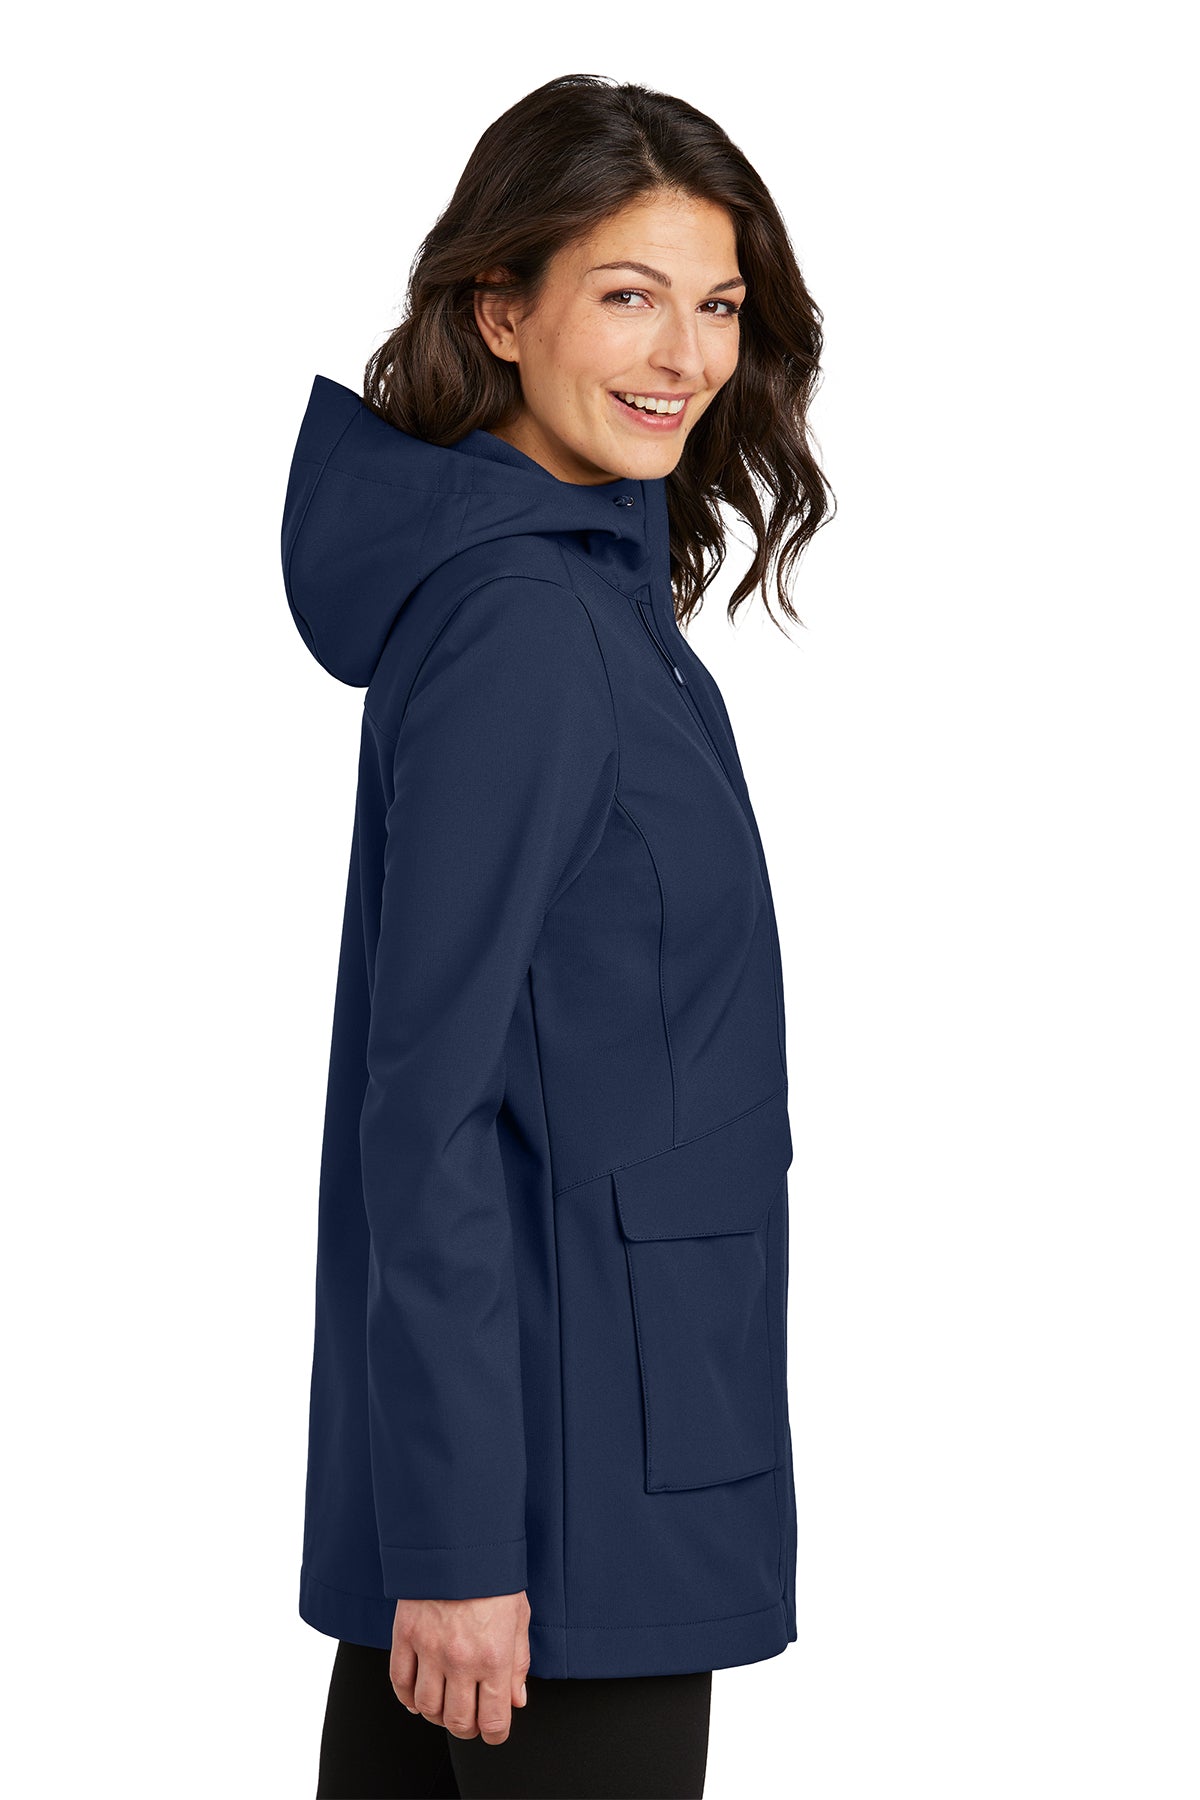 Port Authority Ladies Collective Outer Soft Shell Custom Parkas, River Blue Navy